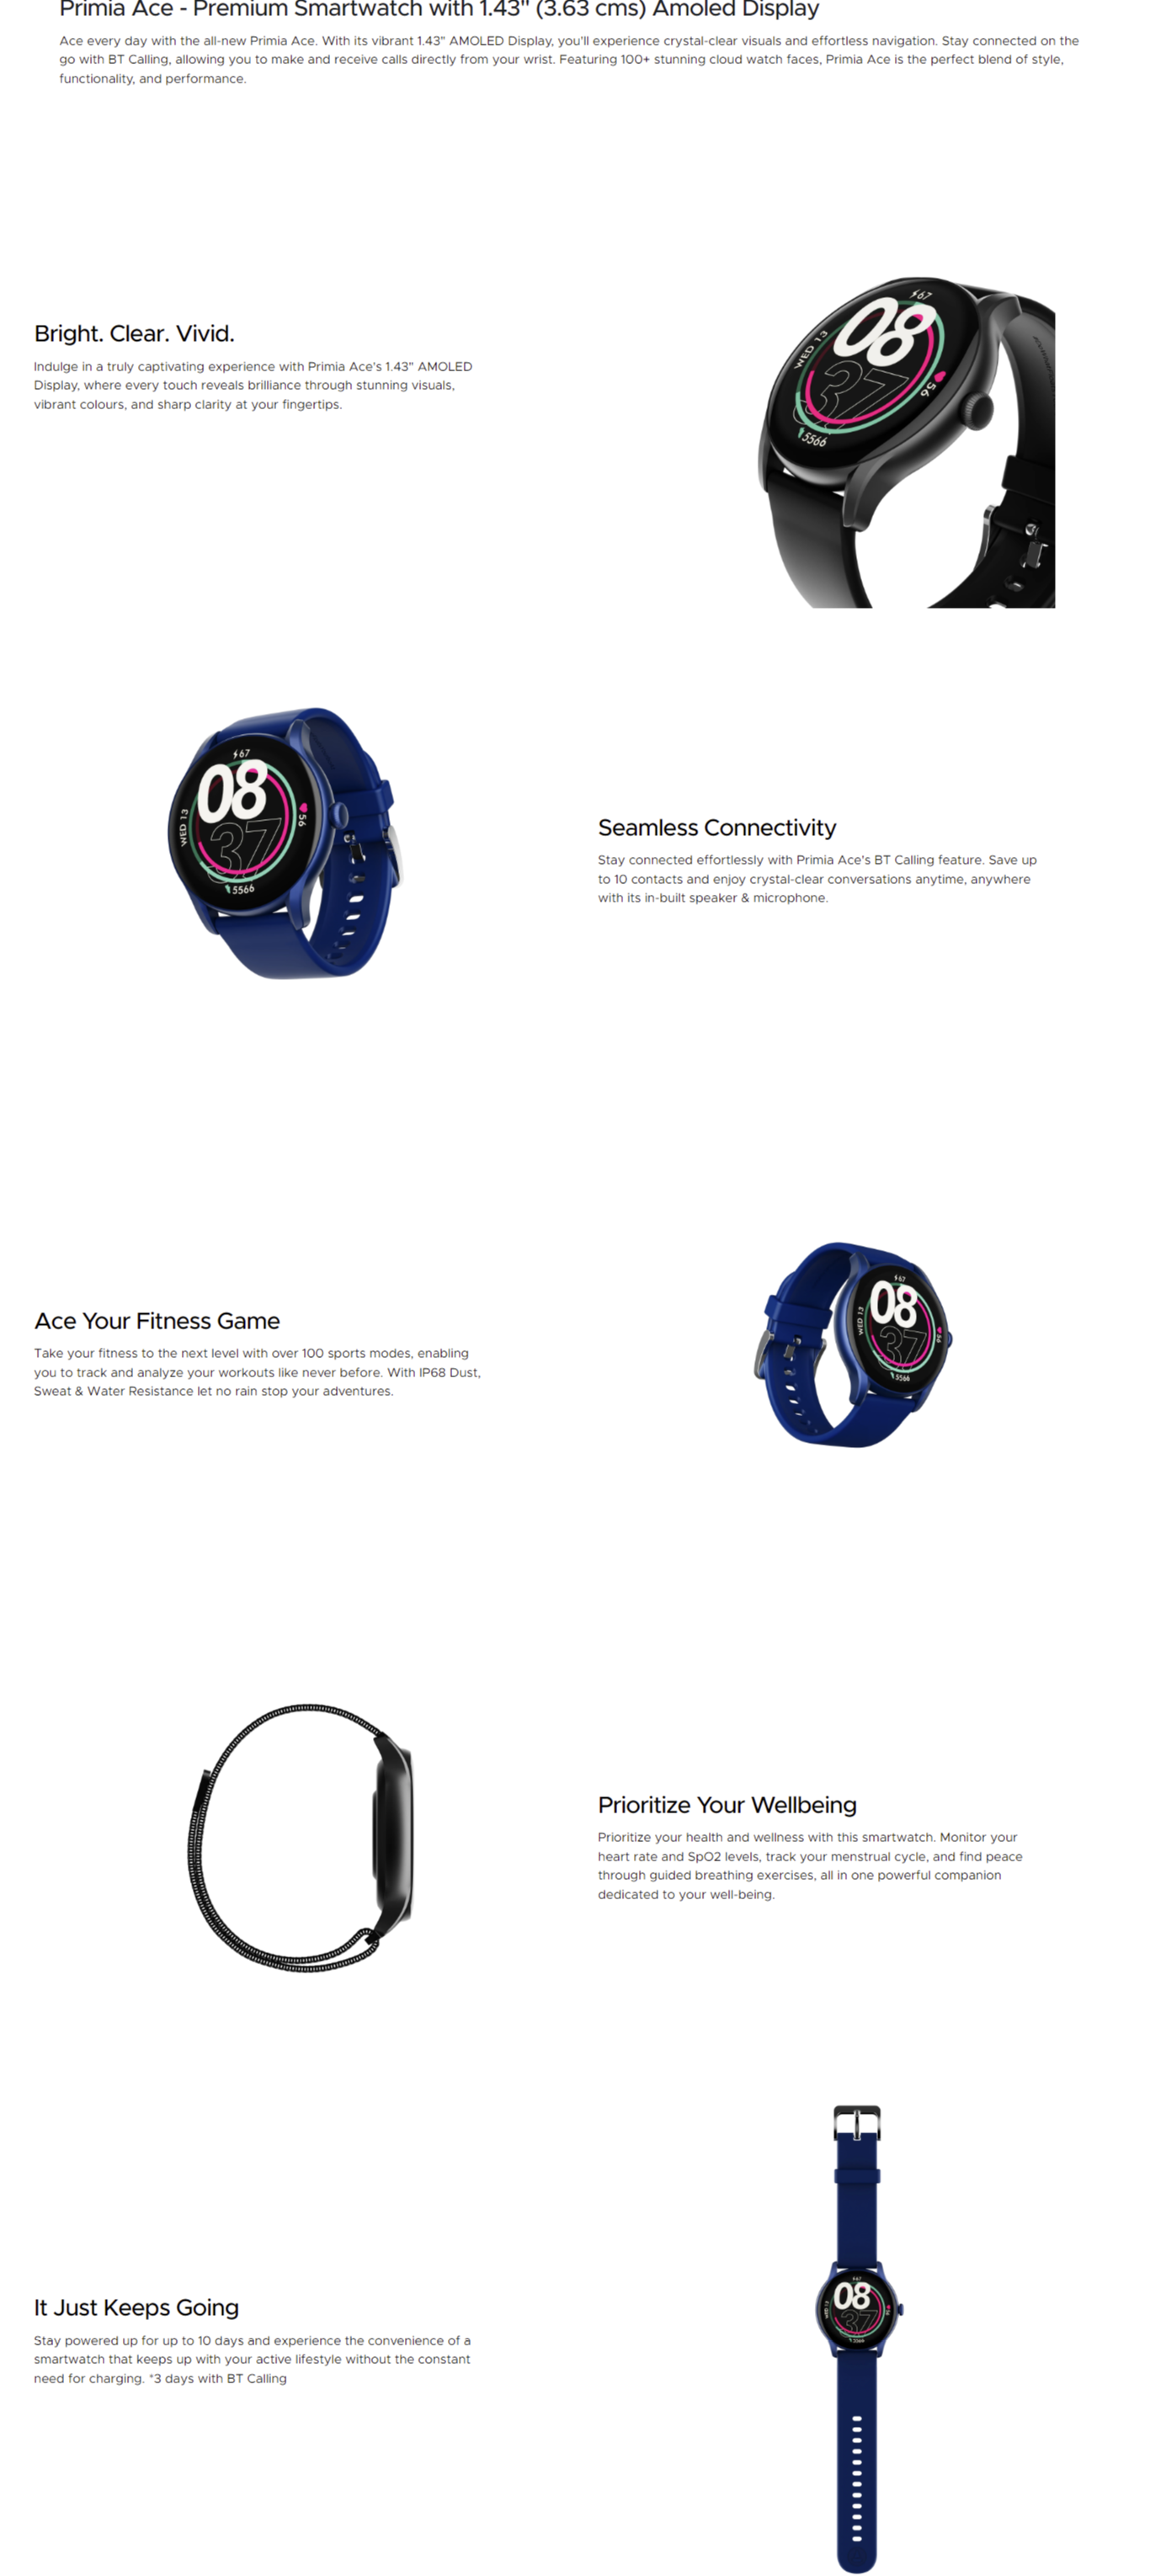 BoAt Primia Ace Smartwatch with Bluetooth Calling (BOATSWPRIMIAACE)